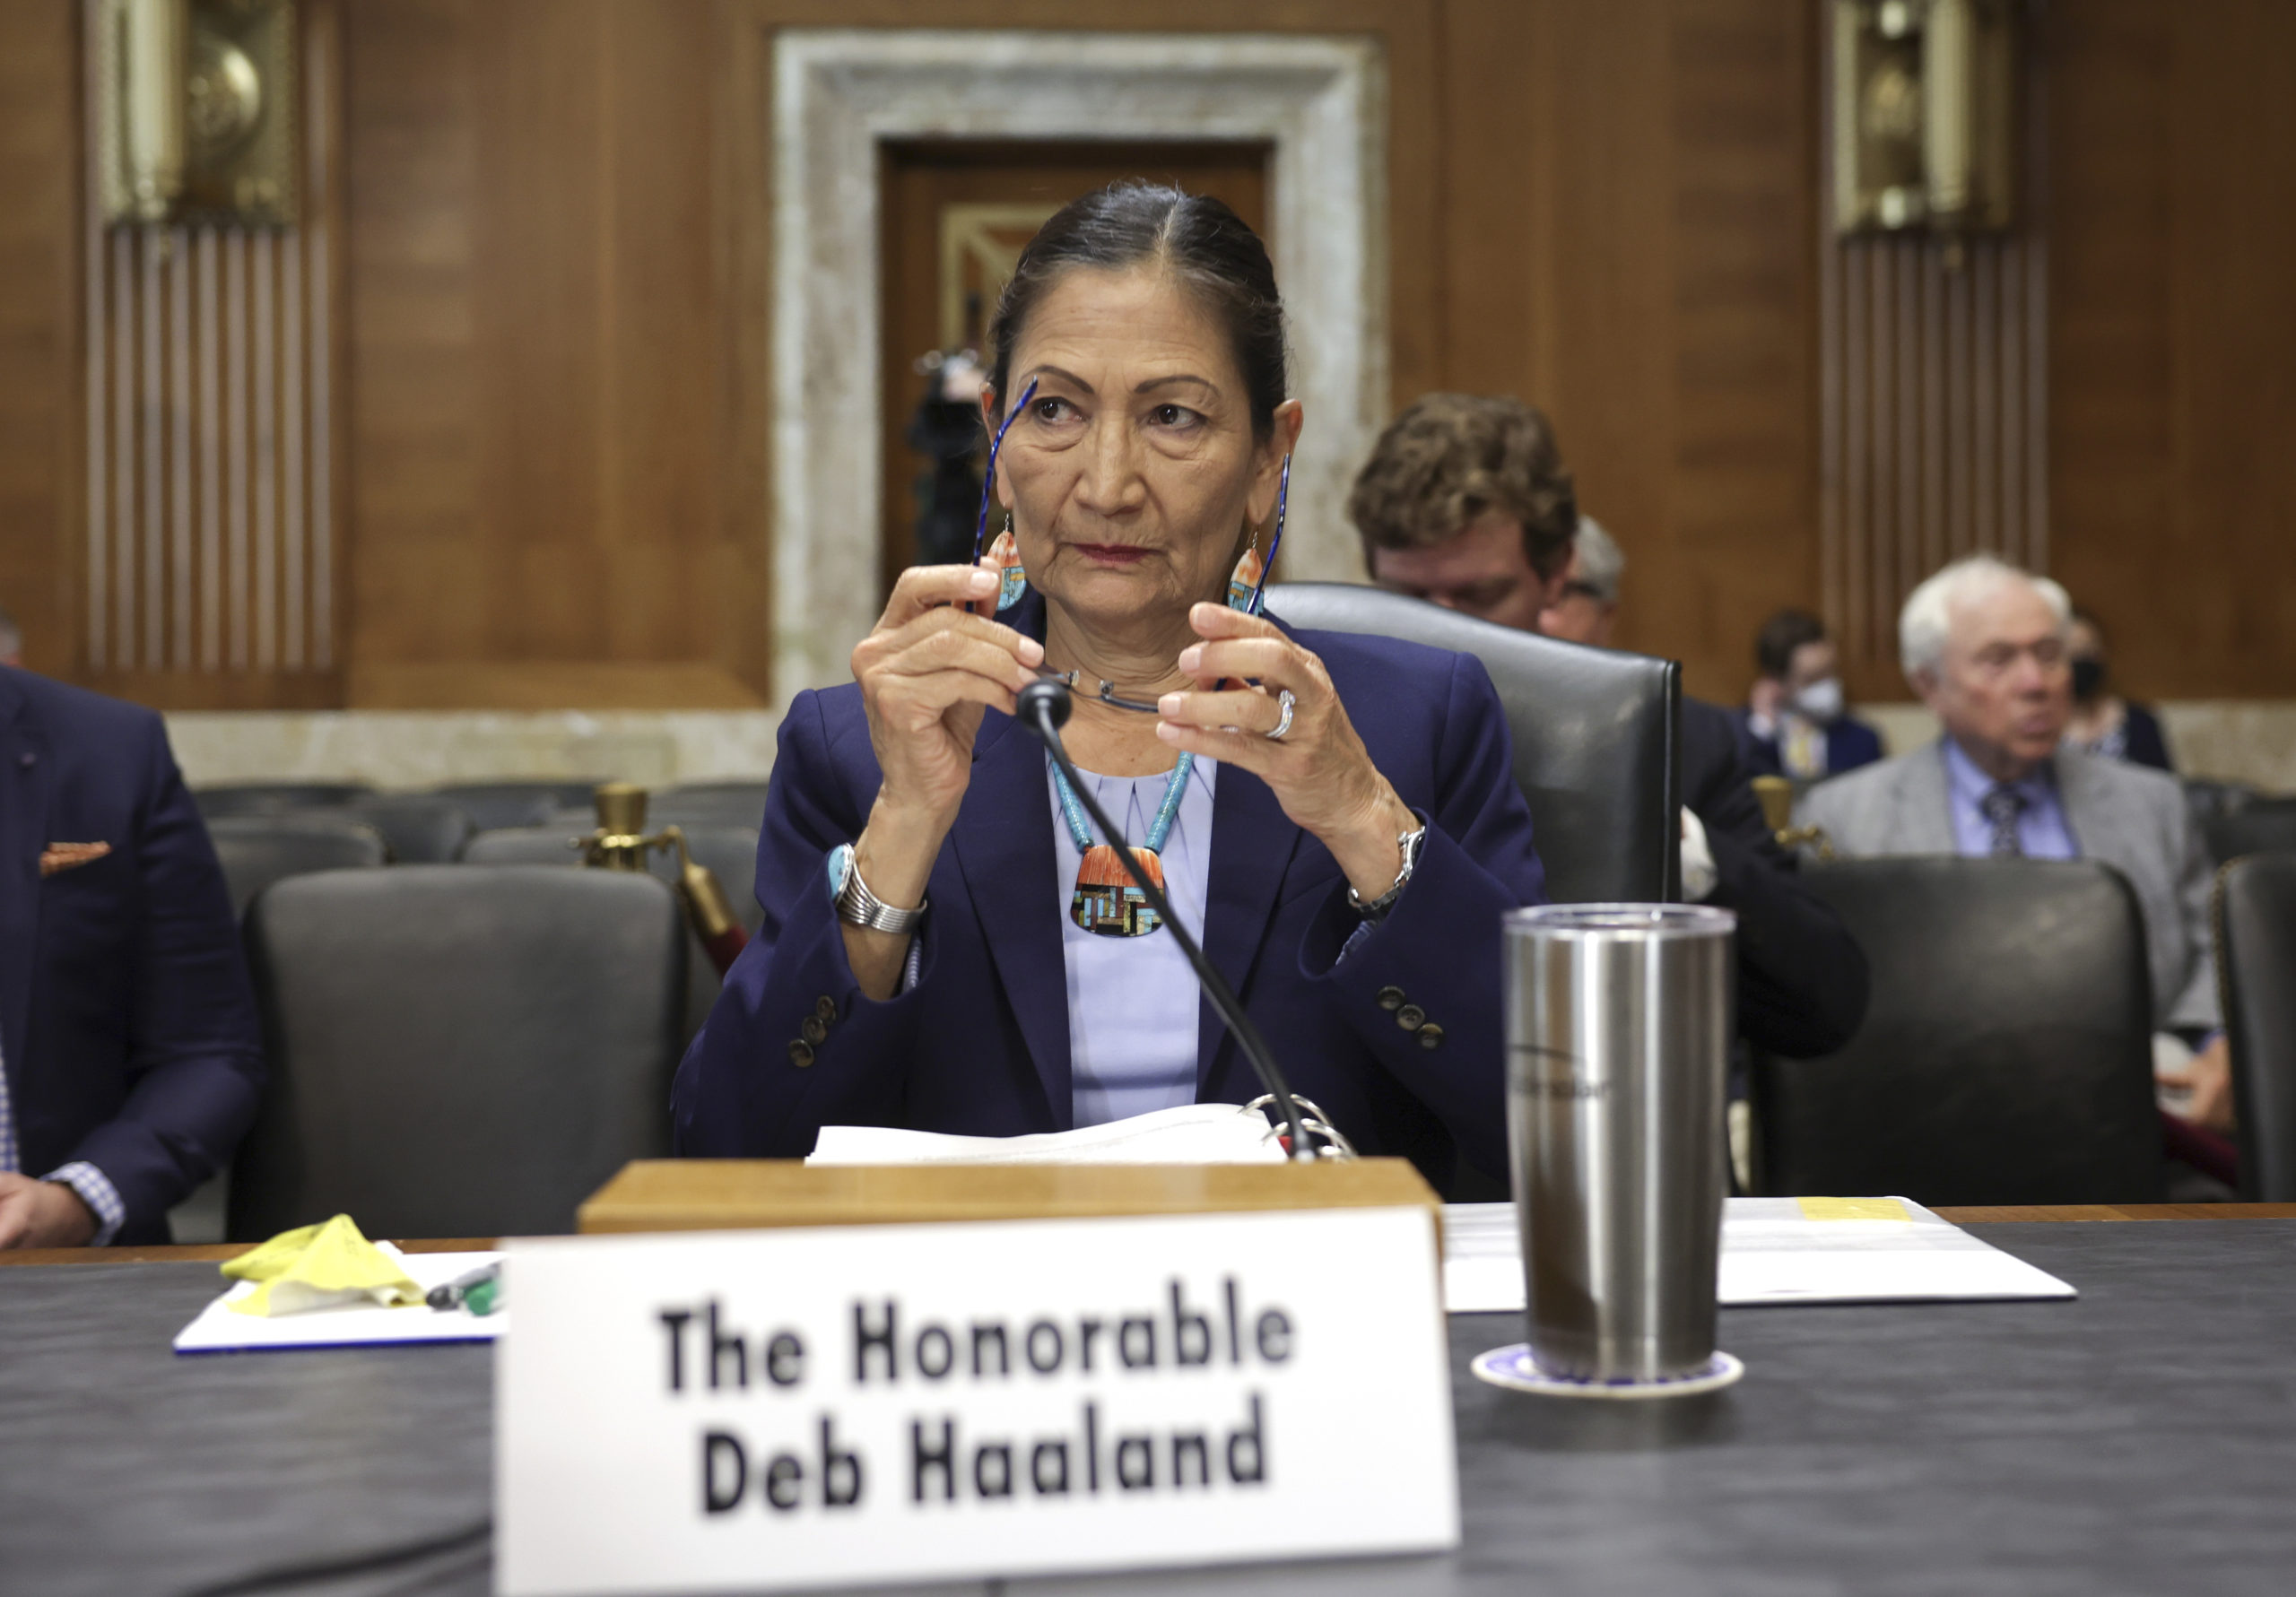 WASHINGTON, DC - MAY 19: U.S. Interior Secretary Deb Haaland testifies before the Senate Energy and Natural Resources Committee at the Dirksen Senate Office Building on May 19, 2022 in Washington, DC. Secretary Haaland testifies on President Biden's fiscal year 2023 Budget Request for the Department of the Interior. (Photo by Kevin Dietsch/Getty Images)